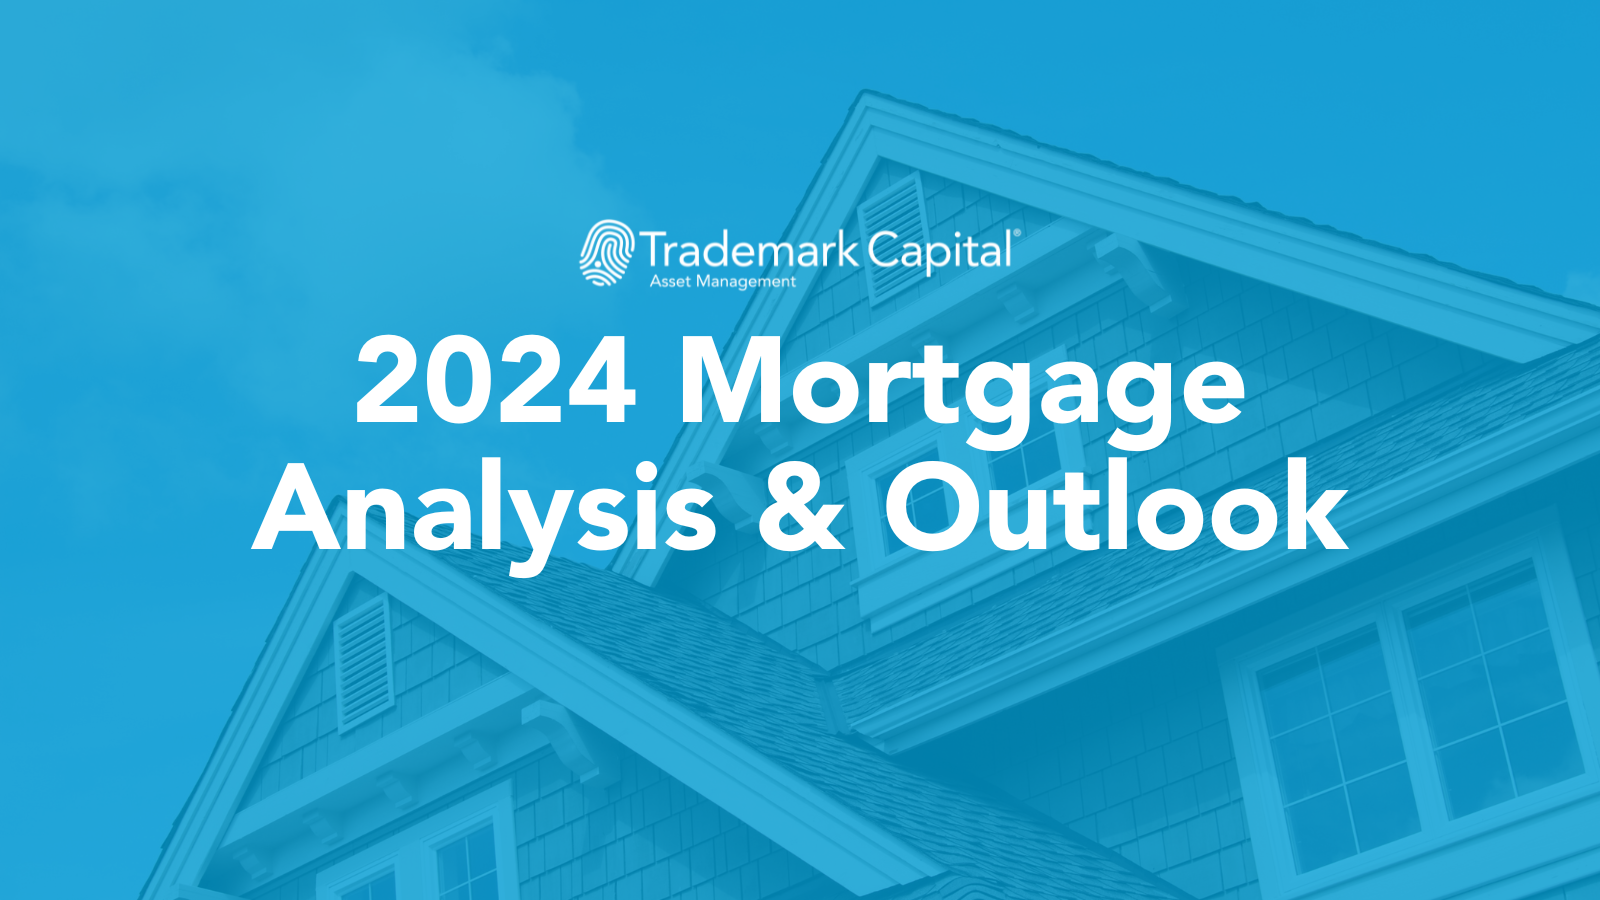 2024 Mortgage Analysis & Outlook